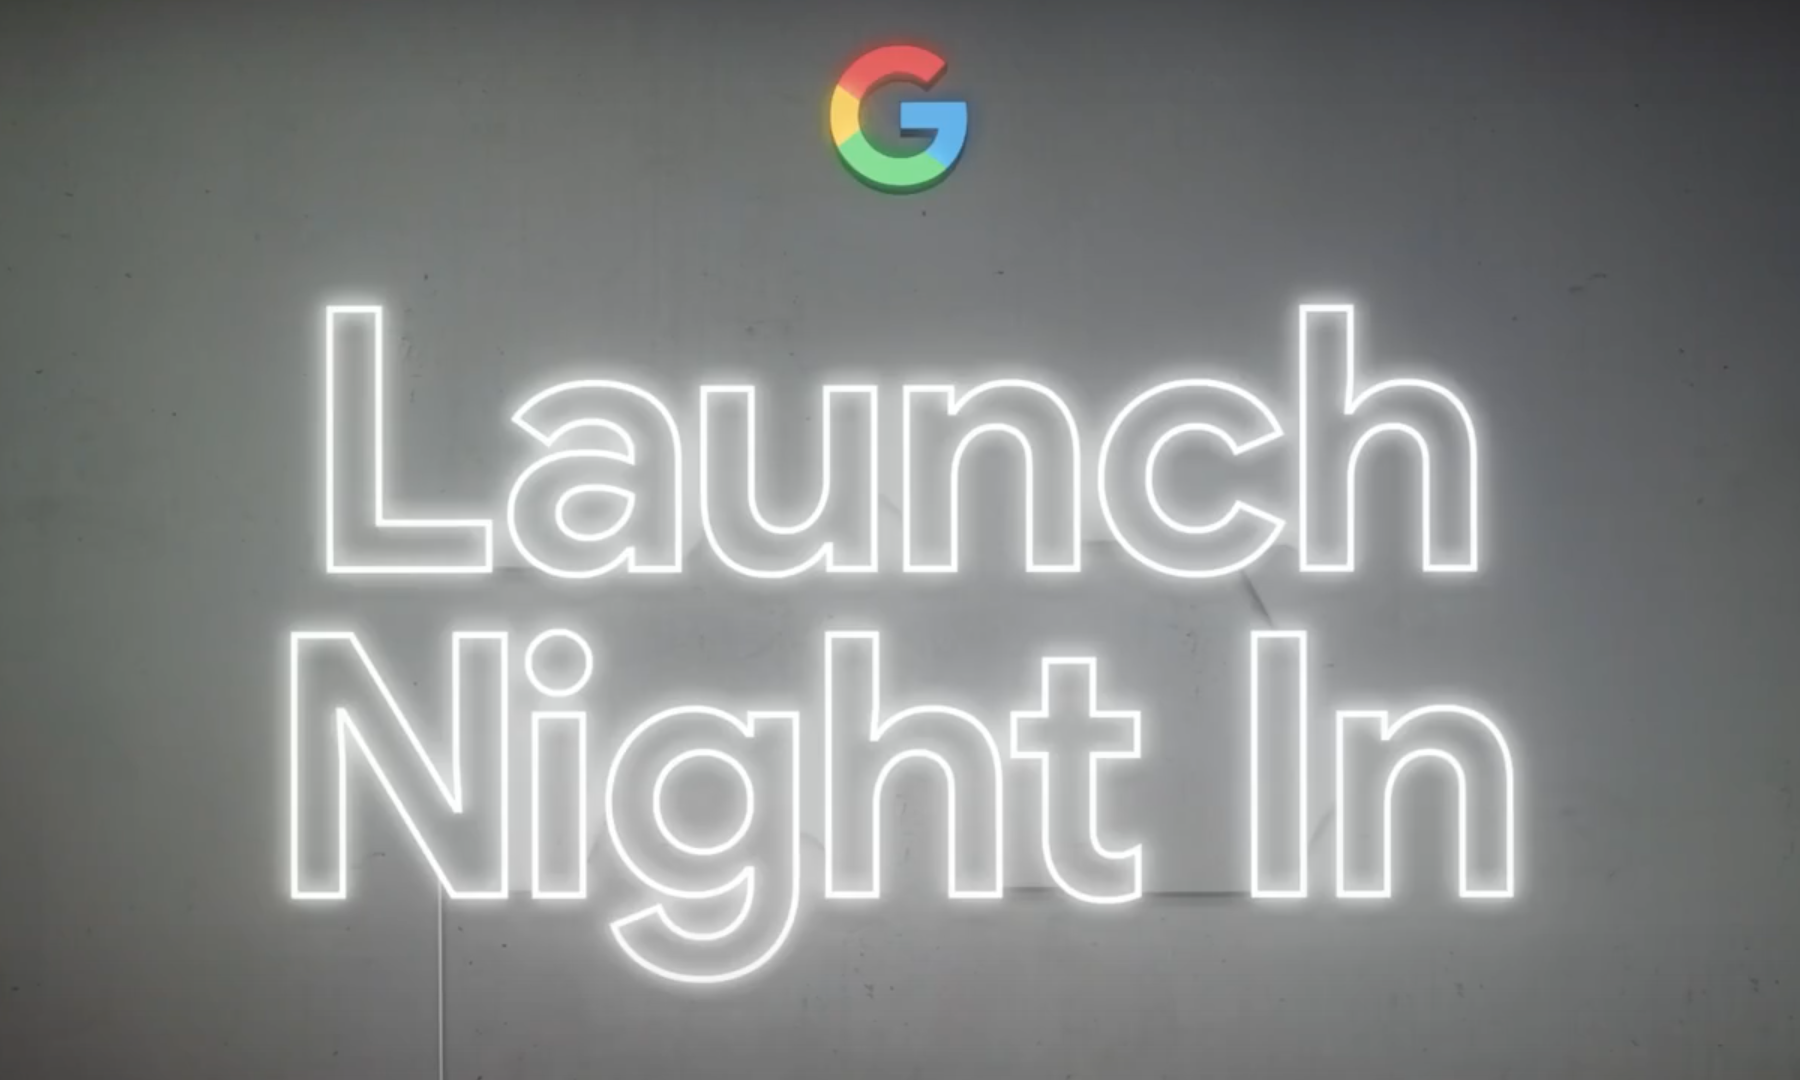 Launch Night In with Google